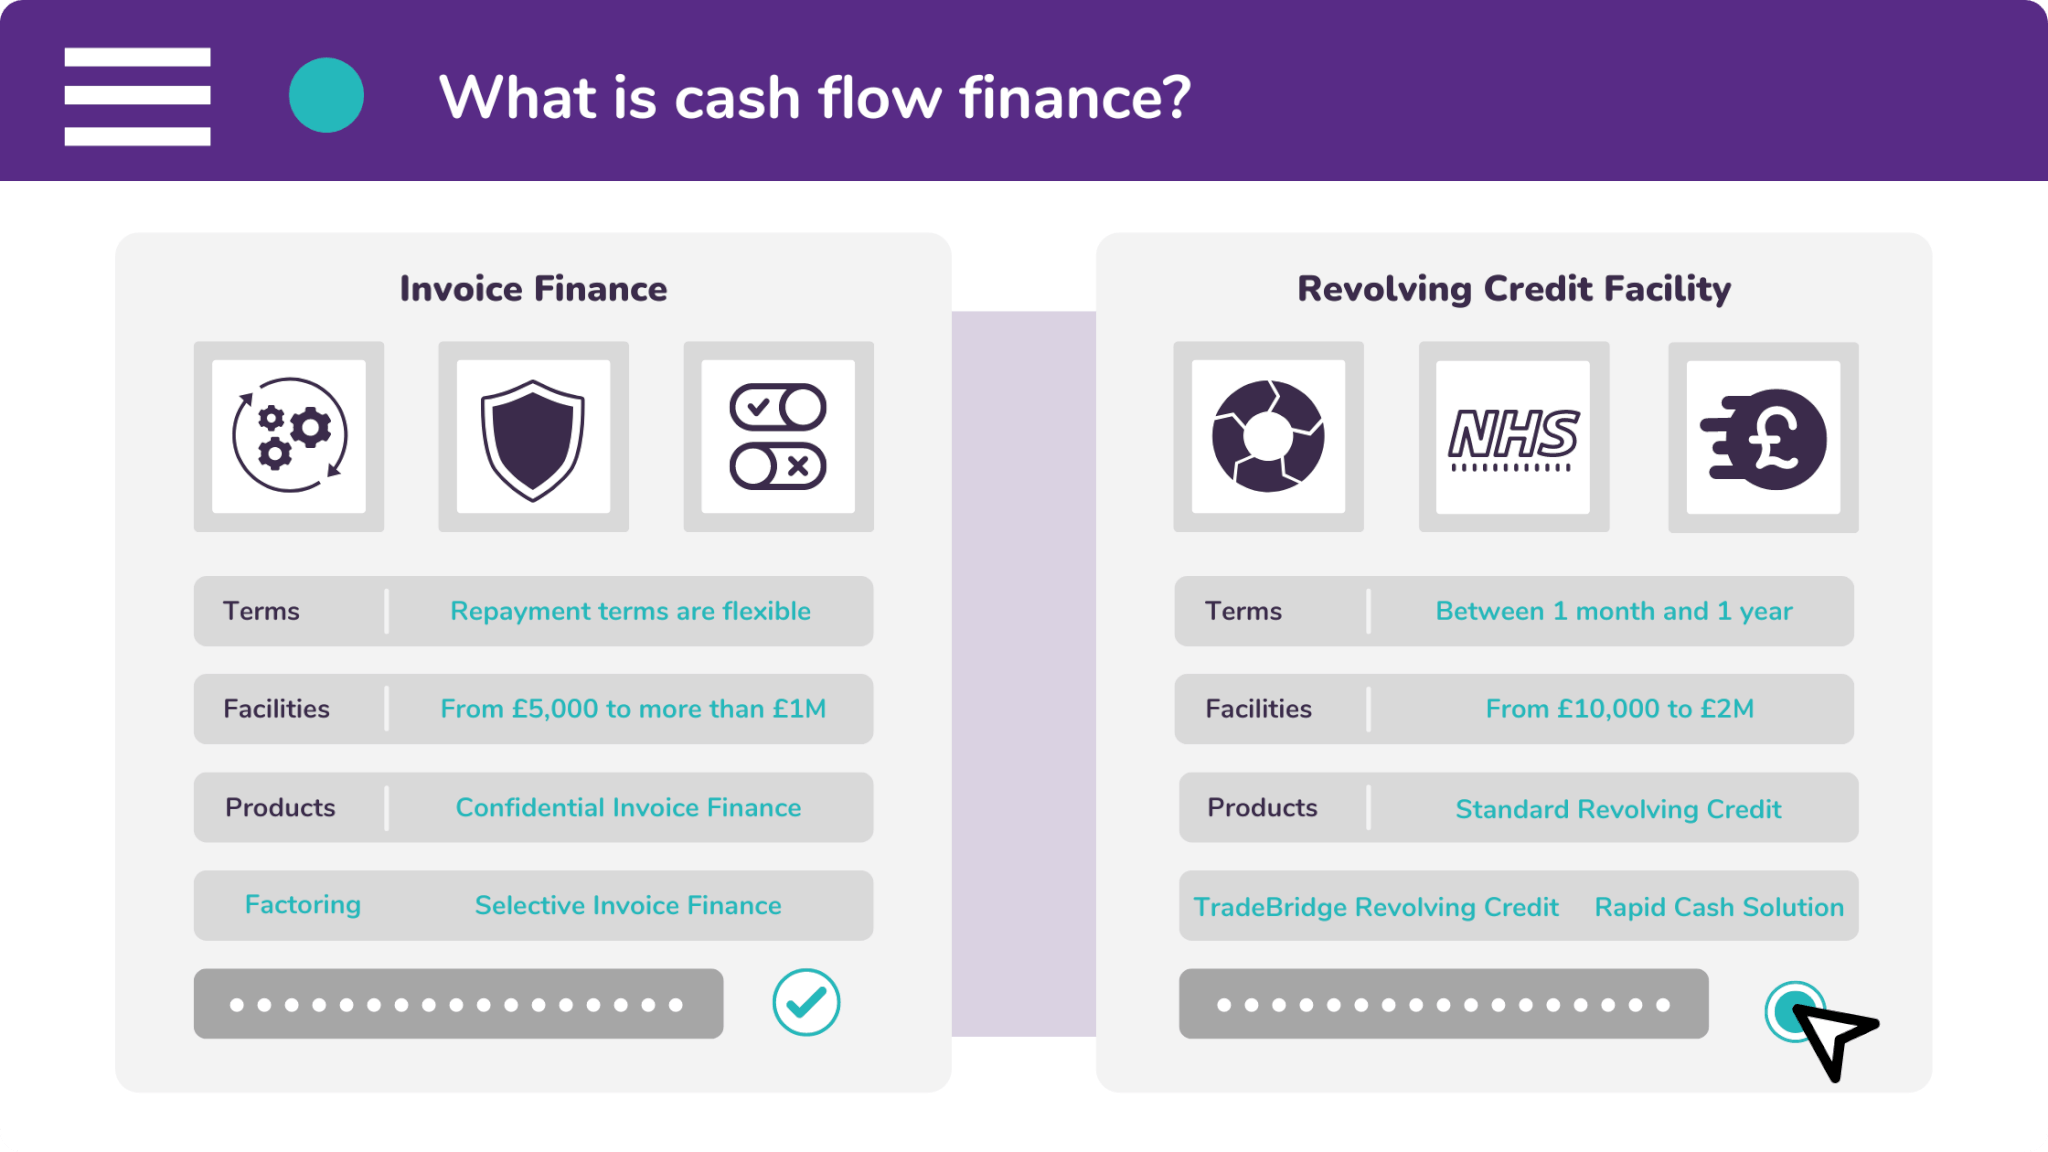 Cash flow finance helps businesses to build a healthy cash flow. It covers invoice finance and revolving credit.